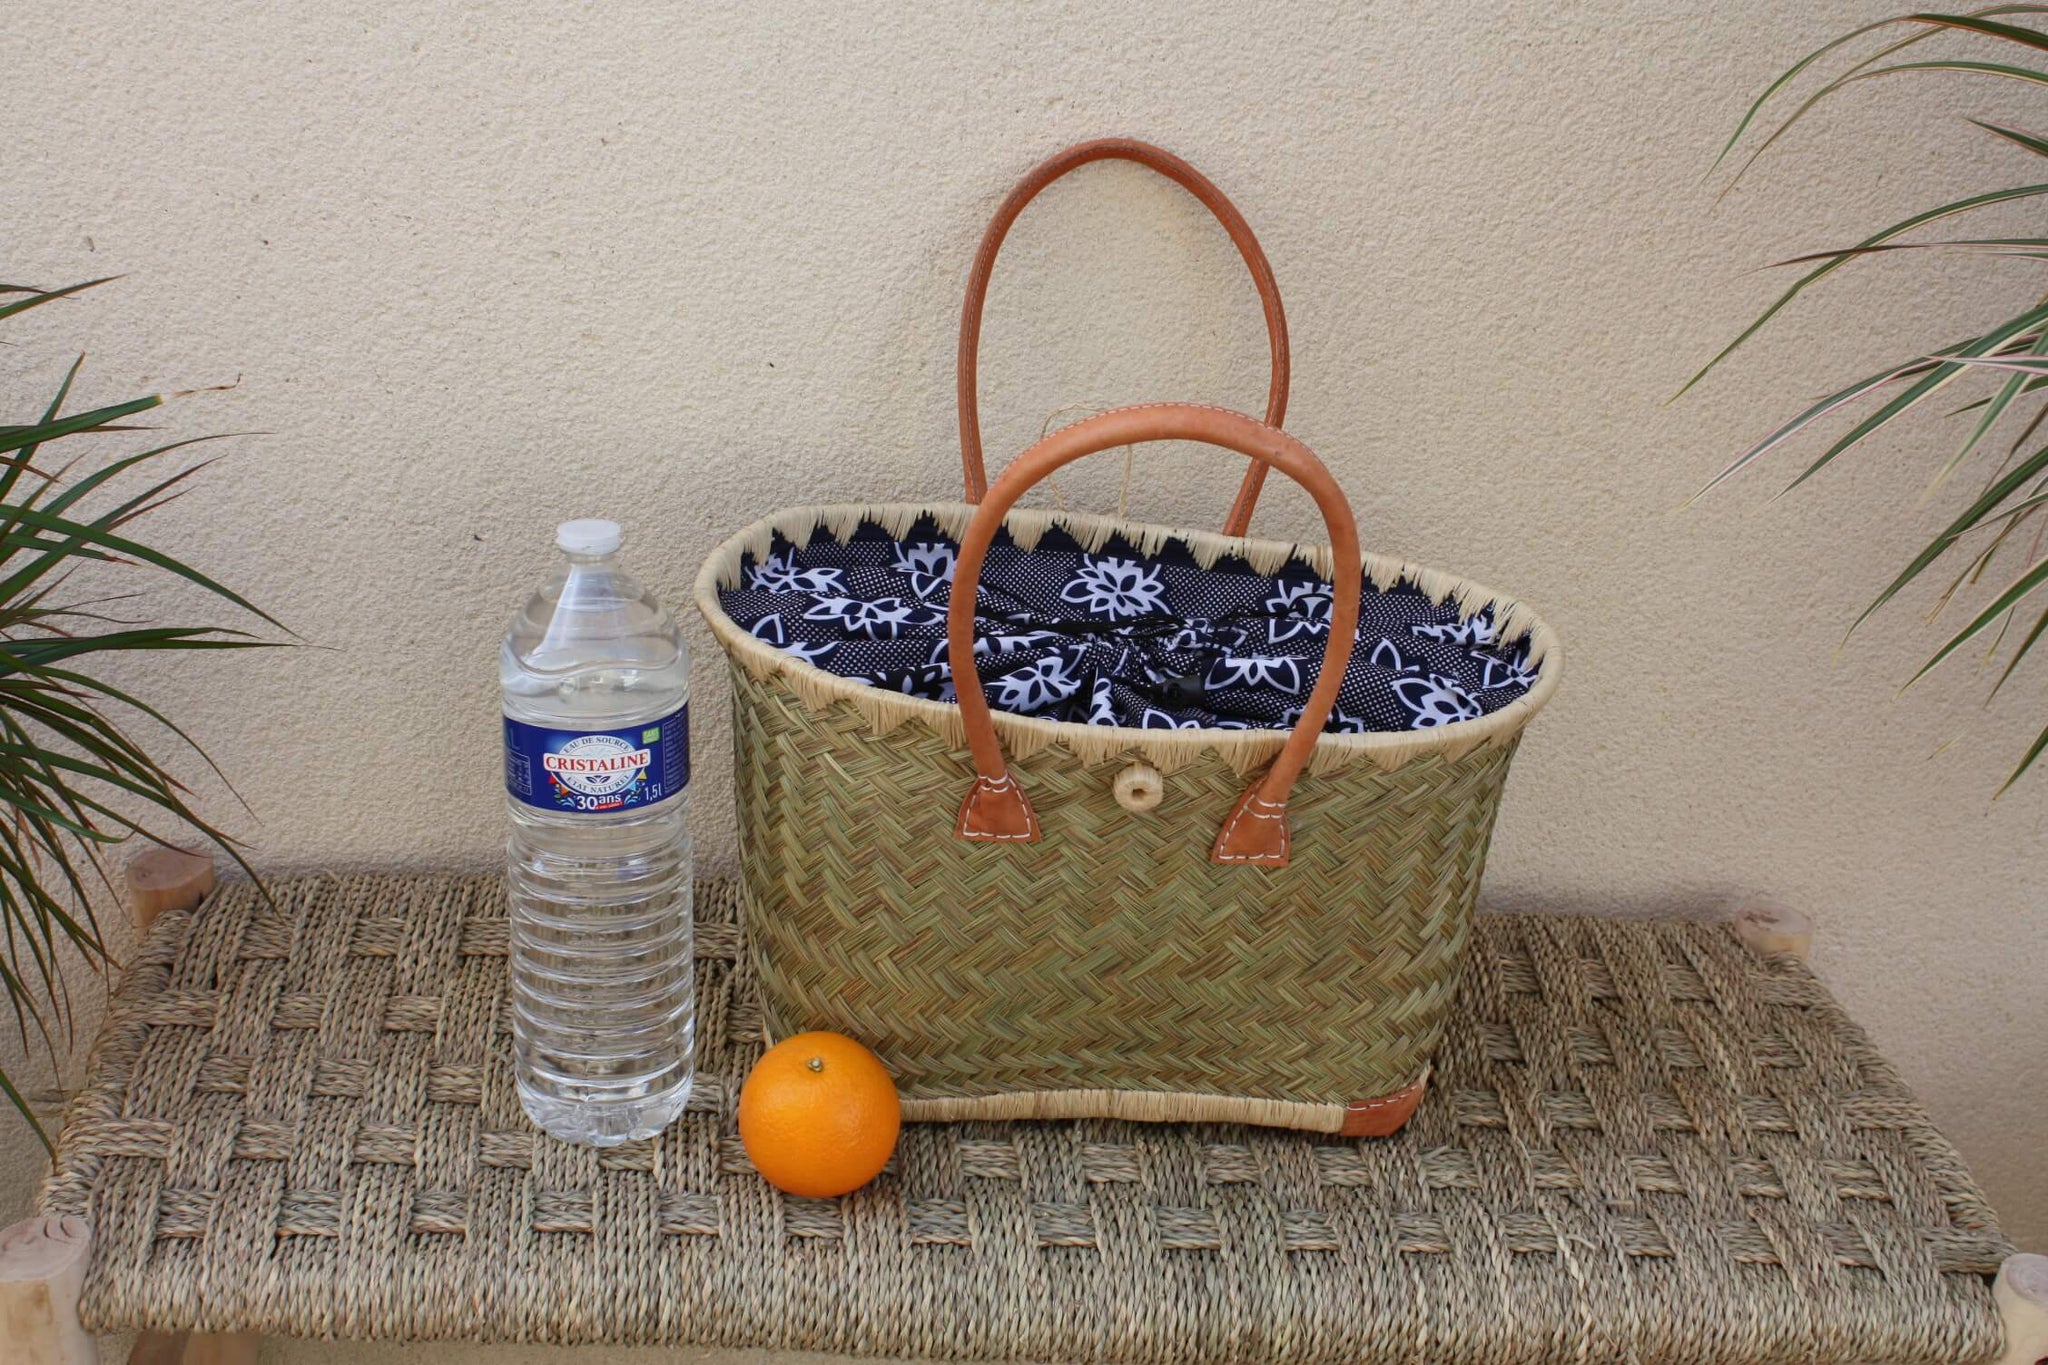 African WAX fabric basket - Tote bag pouch 3 SIZES - markets, shopping, beach...